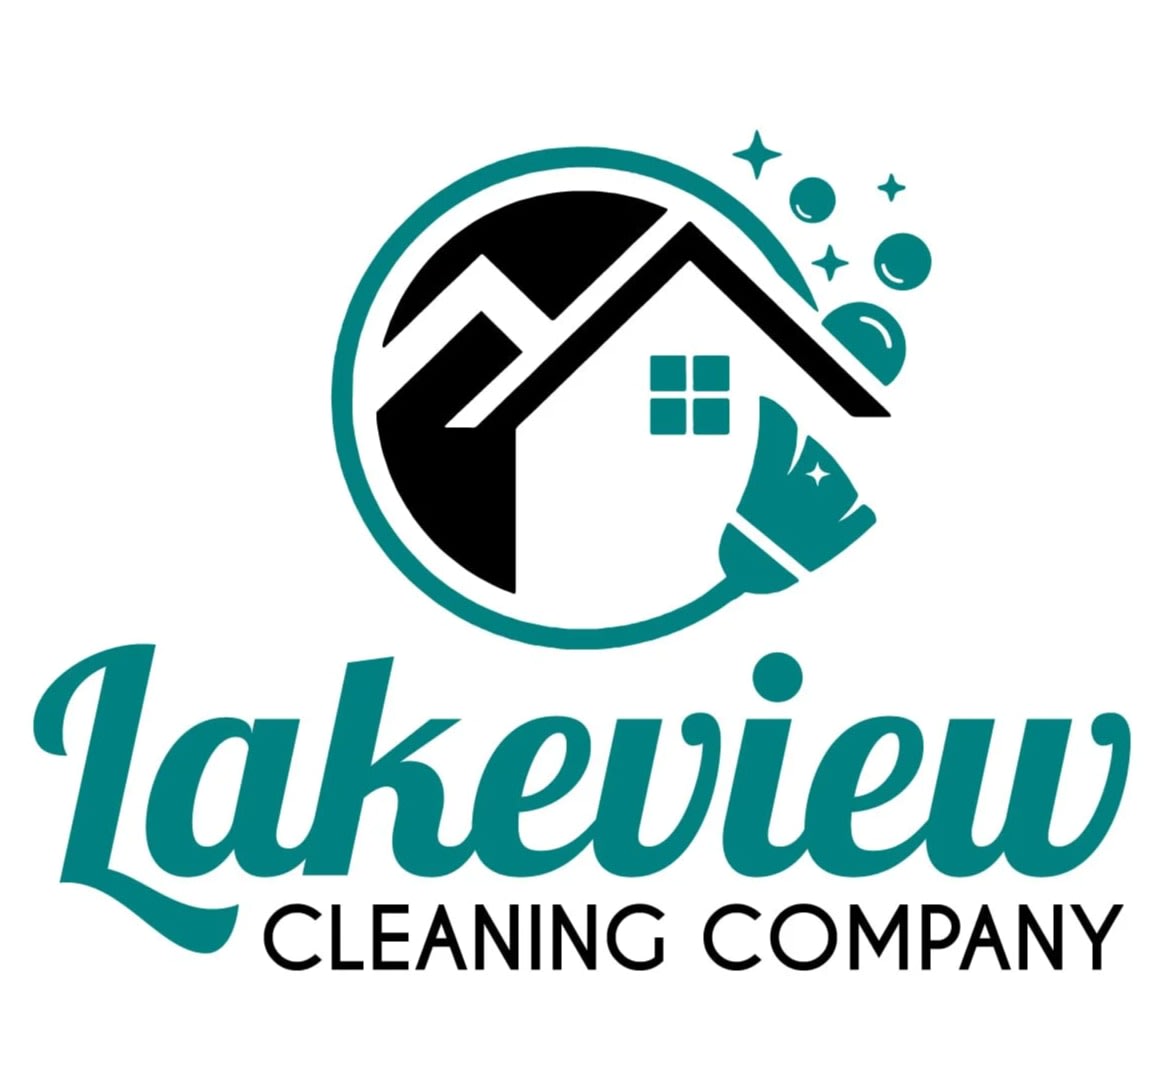 Lakeview Cleaning Company